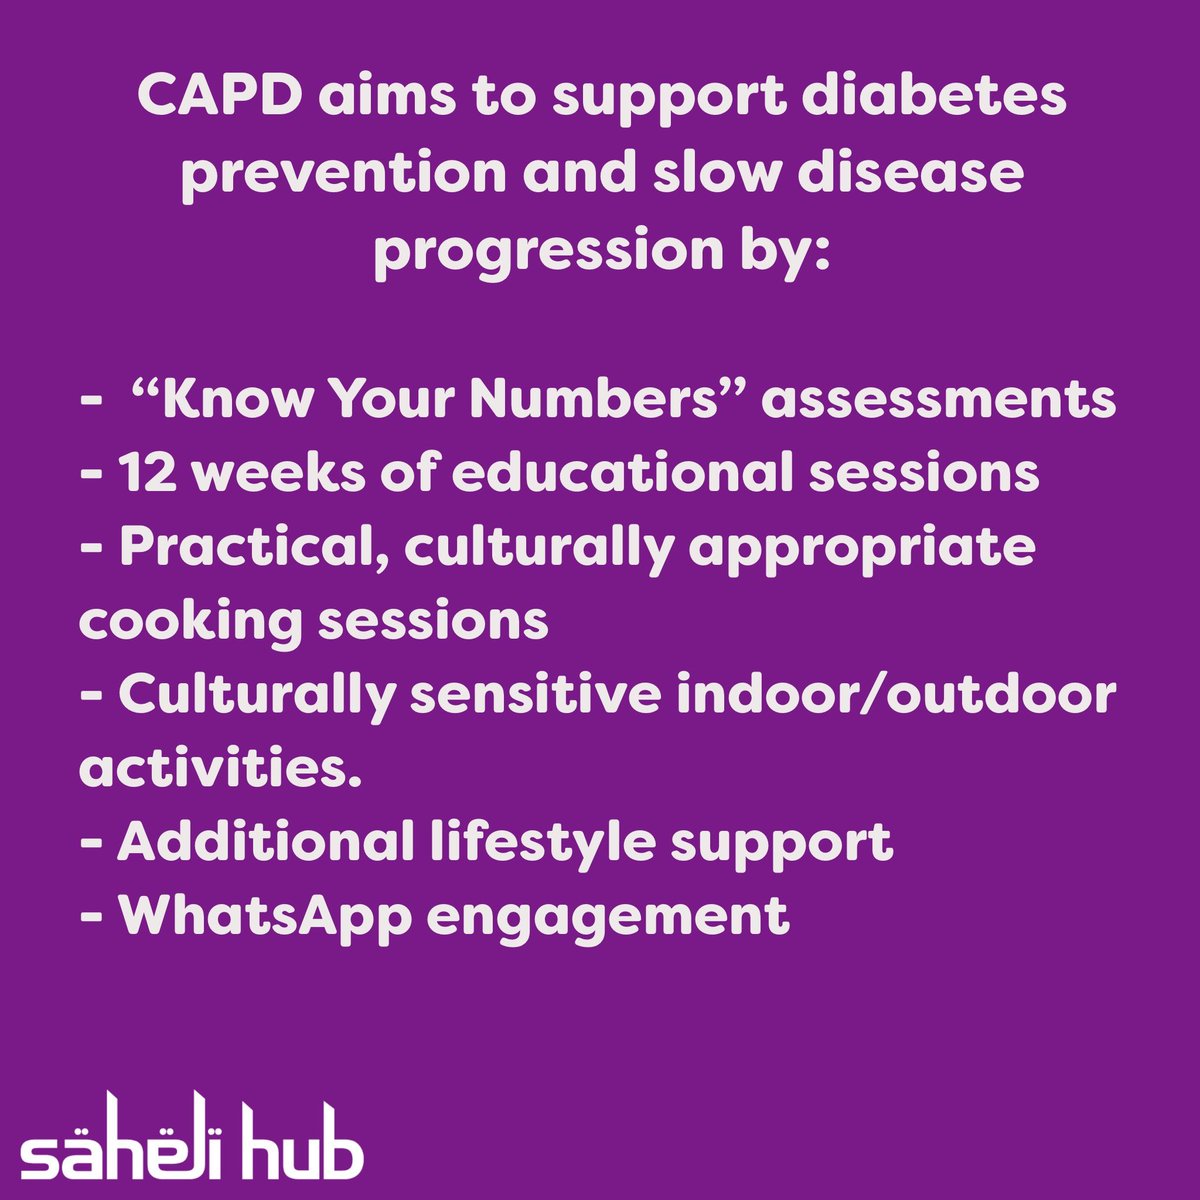 We wanted to share a little about our Culturally Appropriate Prevention of Diabetes (CAPD) program at Saheli Hub this Diabetes Week 2023.
#sahelihub #teamsaheli #CAPD #knowyournumbers #diabetesweek2023 #diabetes #socialprescribing #omniapractice #ARCC #alumrock